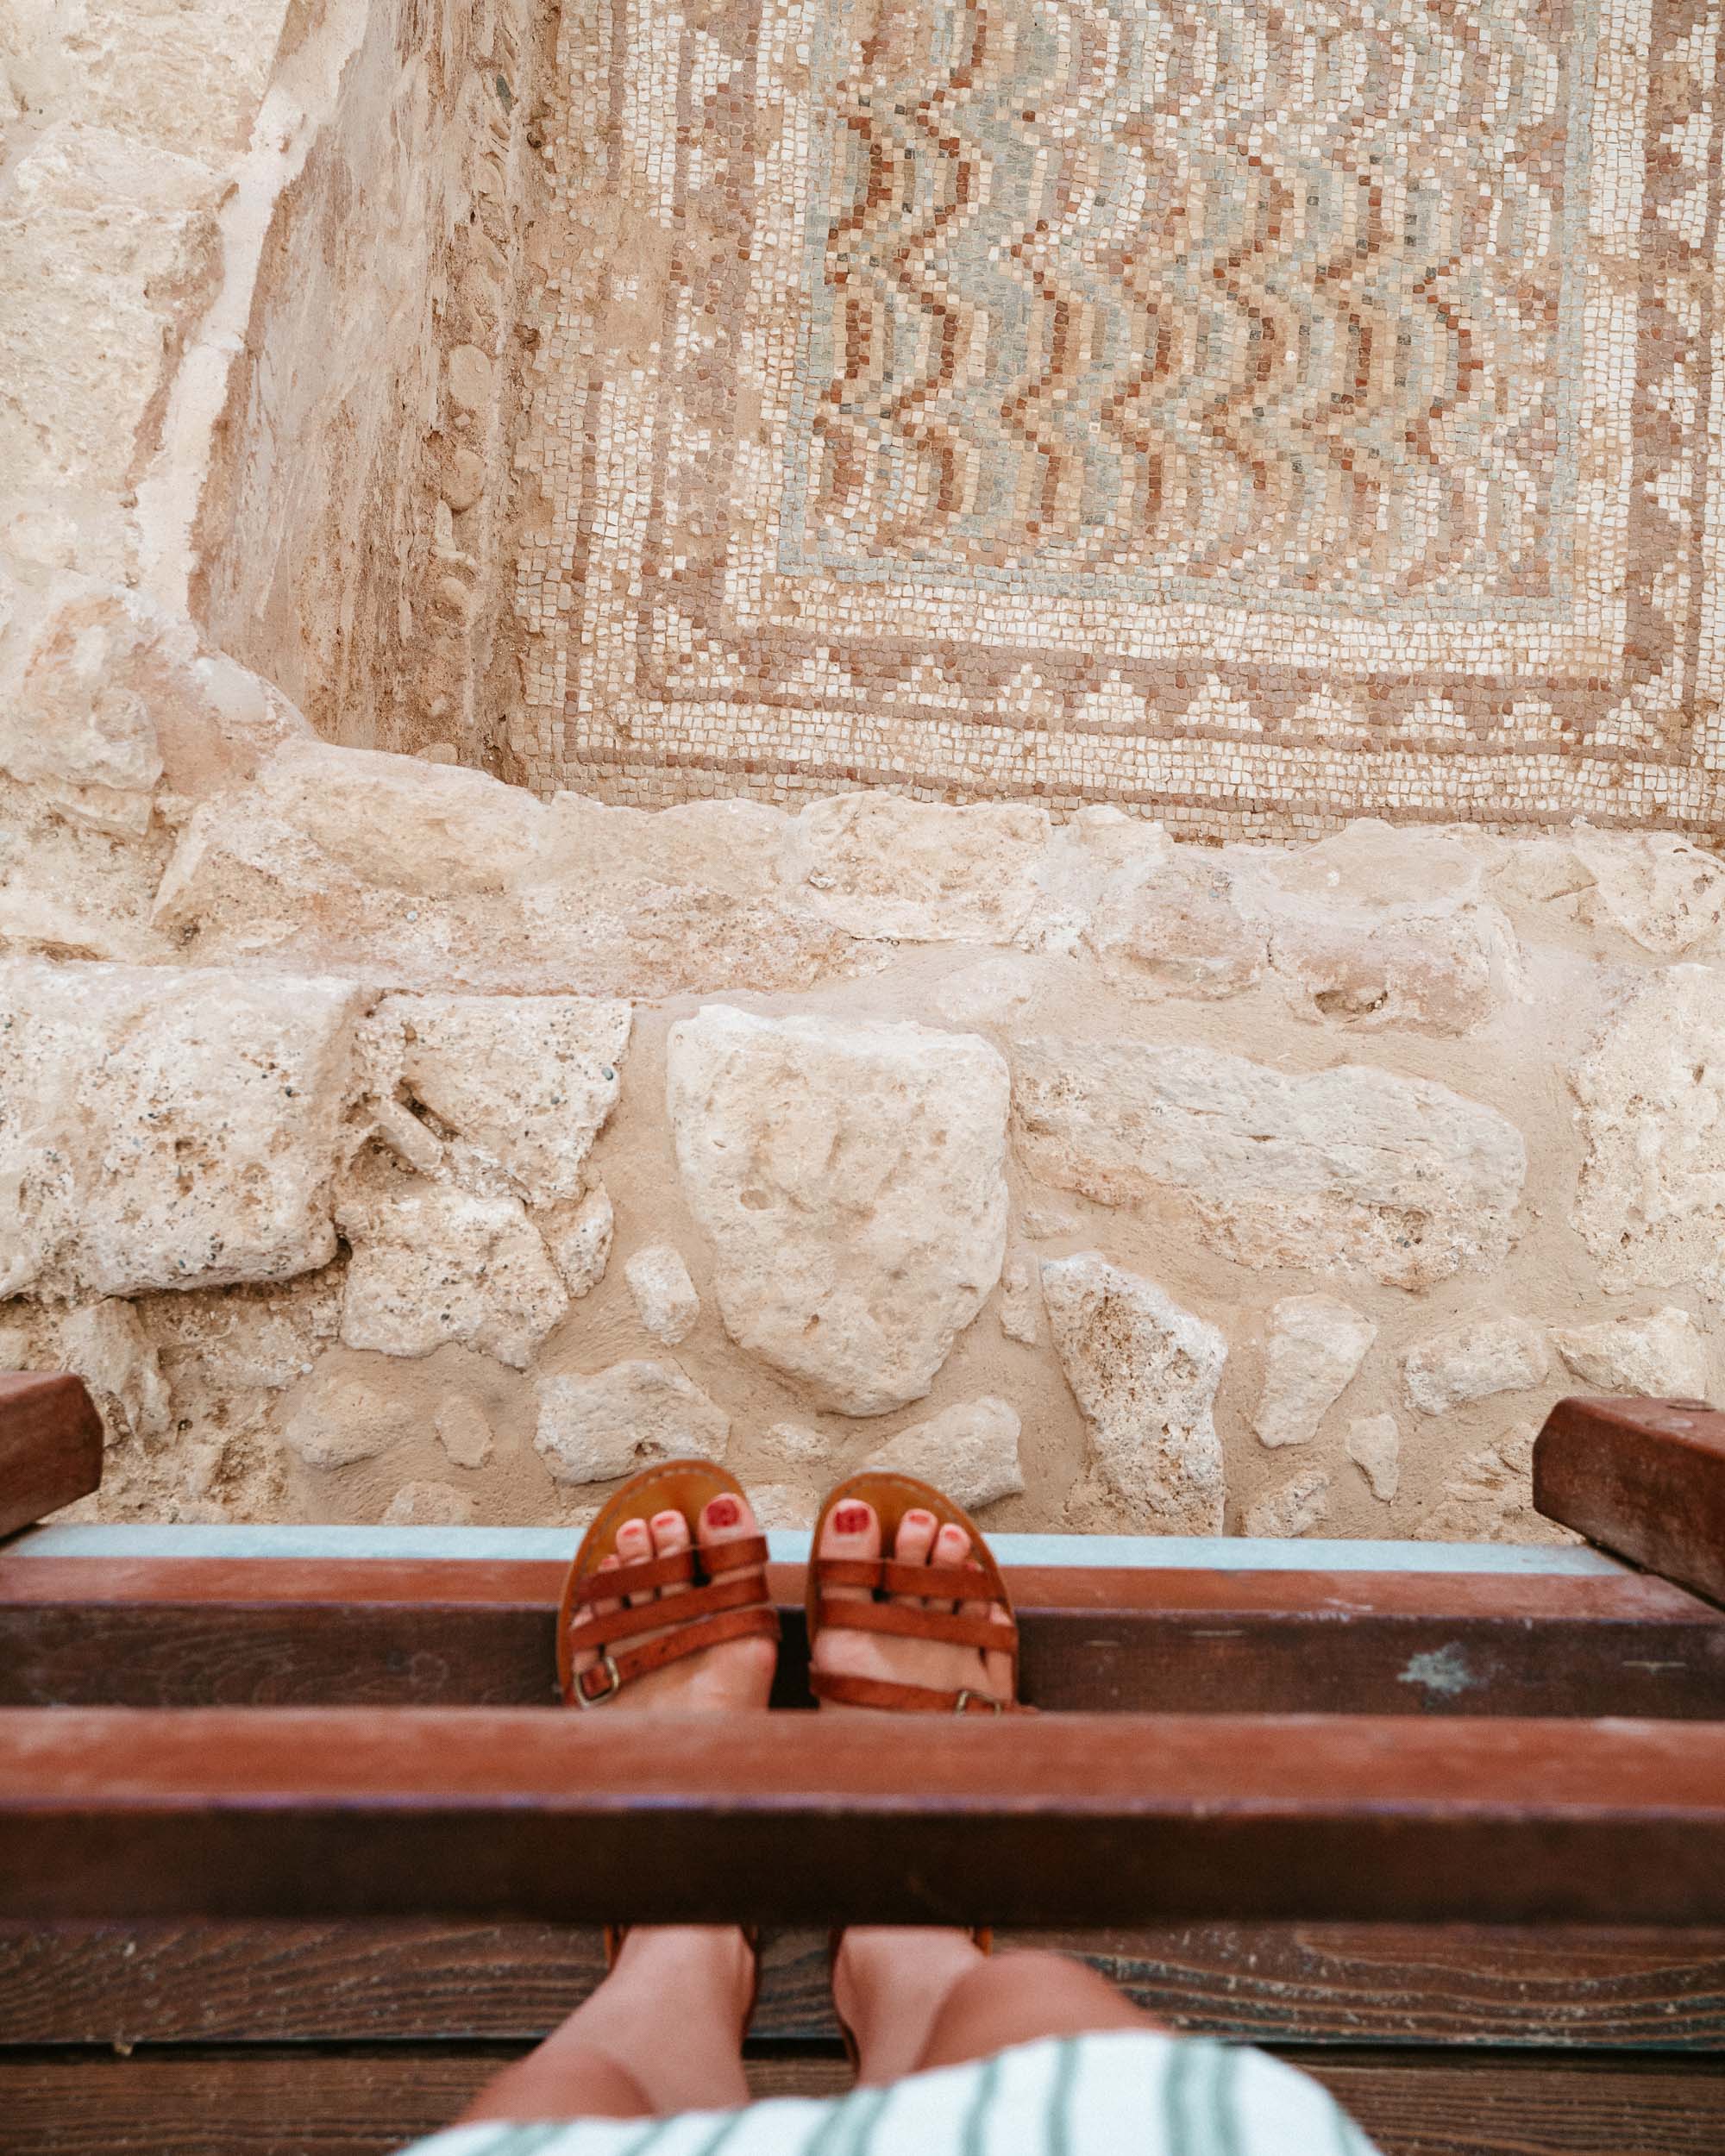 Paphos mosaic archaeological park and views of Cyprus via @finduslost